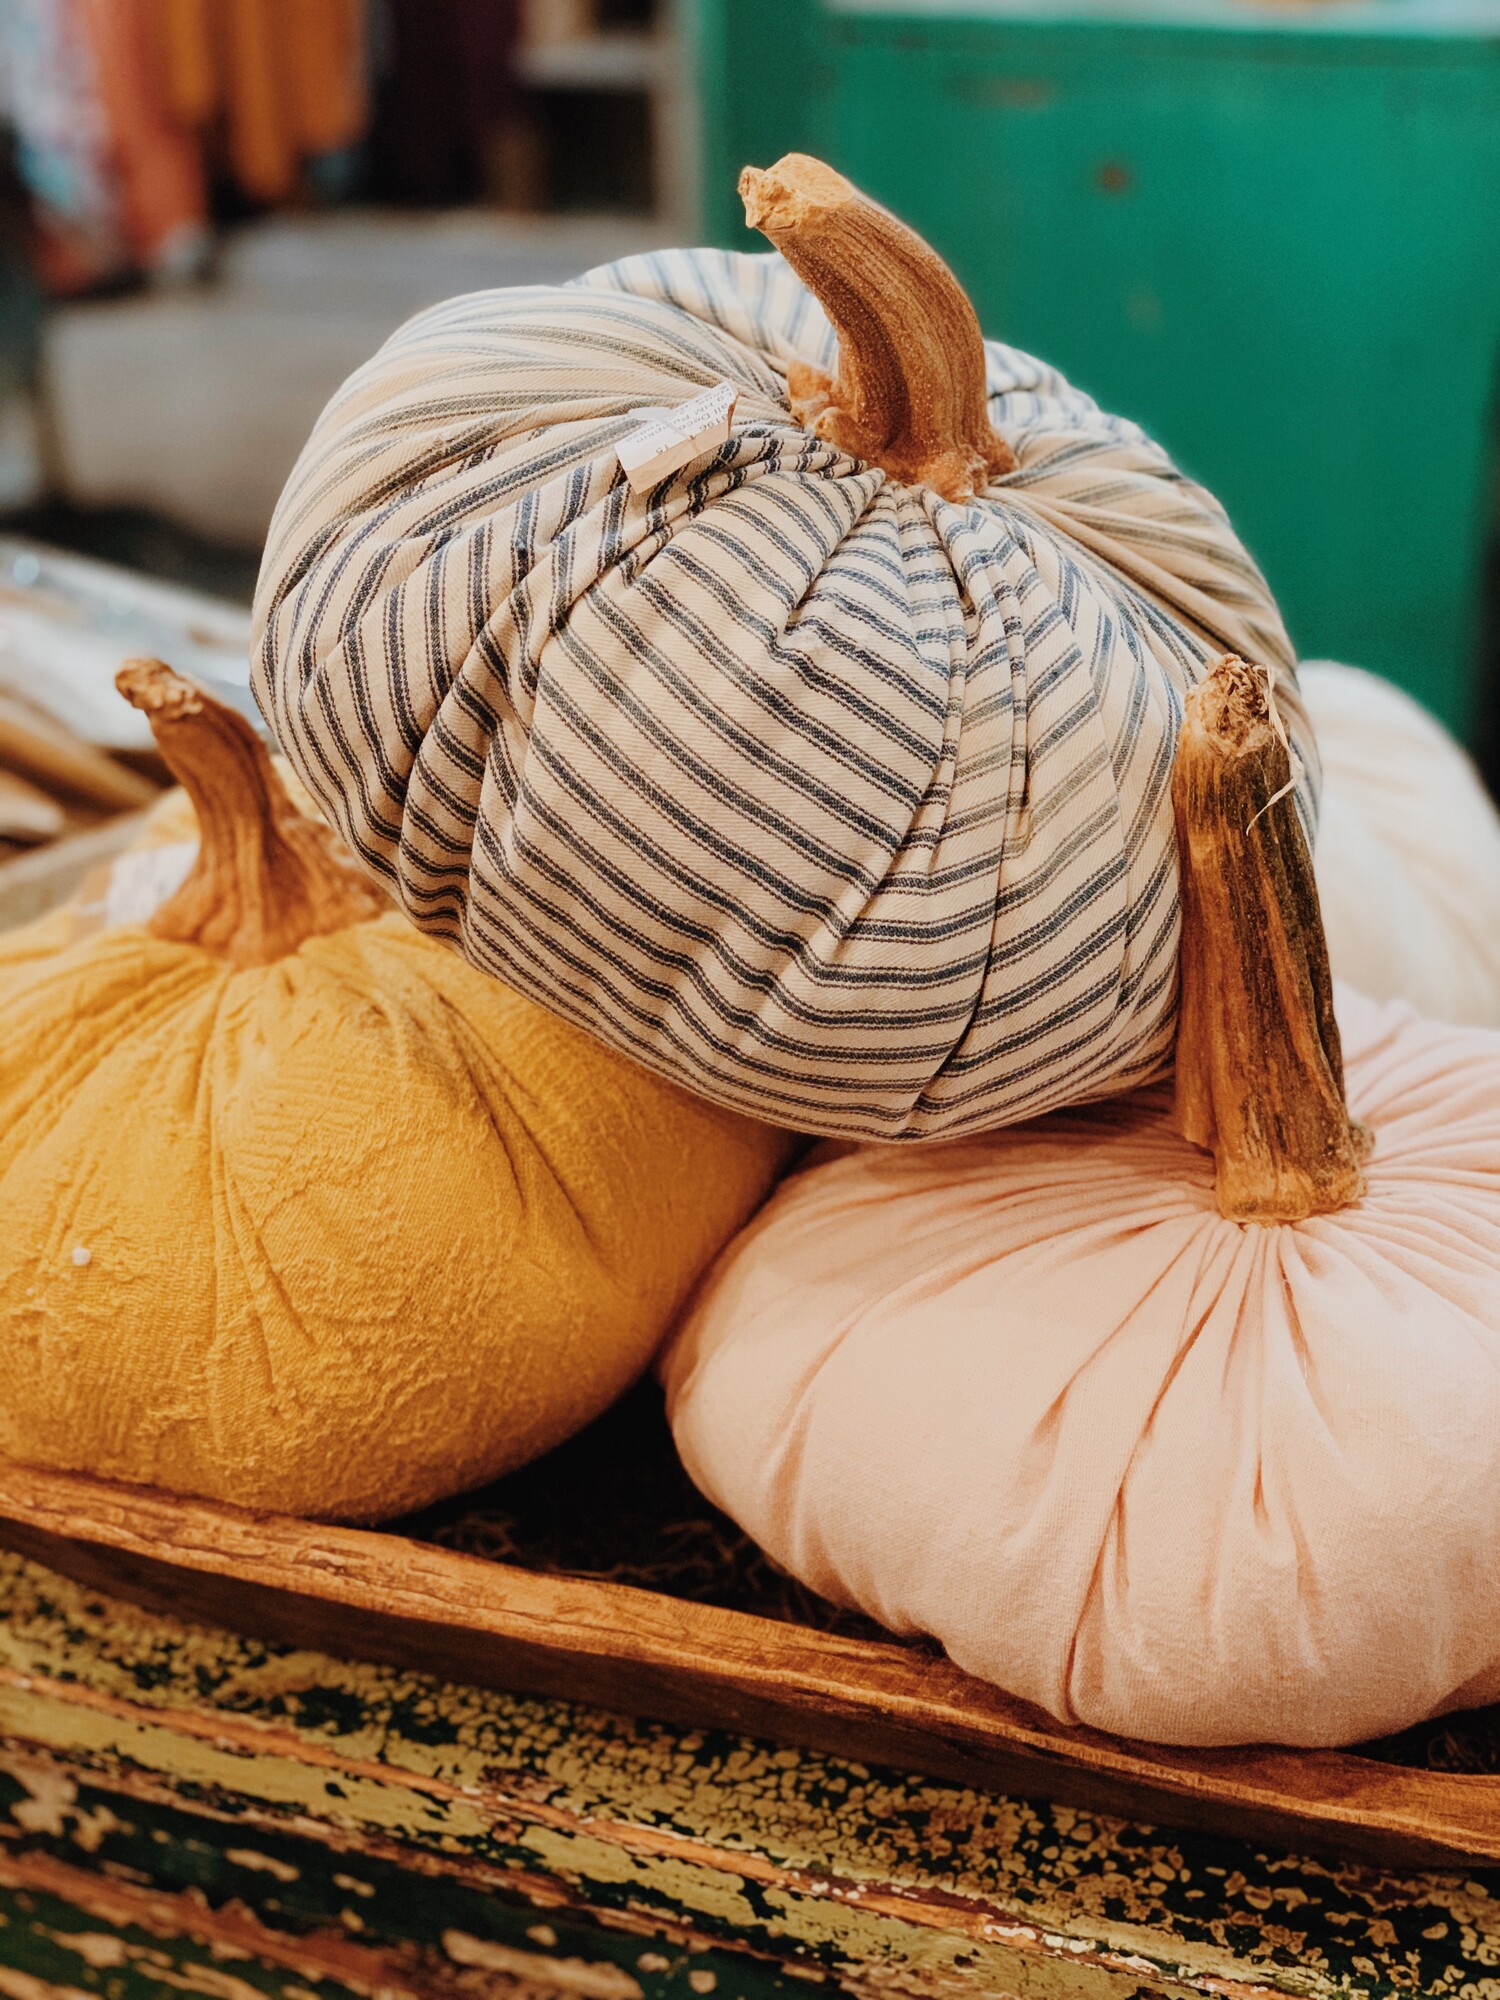 These handmade pumpkins measure about 11 inches in diameter and are made from vintage fabrics and have real pumpkin stems! They are available in Leopard 1, Leopard 2, Pink, Pink Chenille, Blue Ticking, Khaki, Yellow, and Cream.